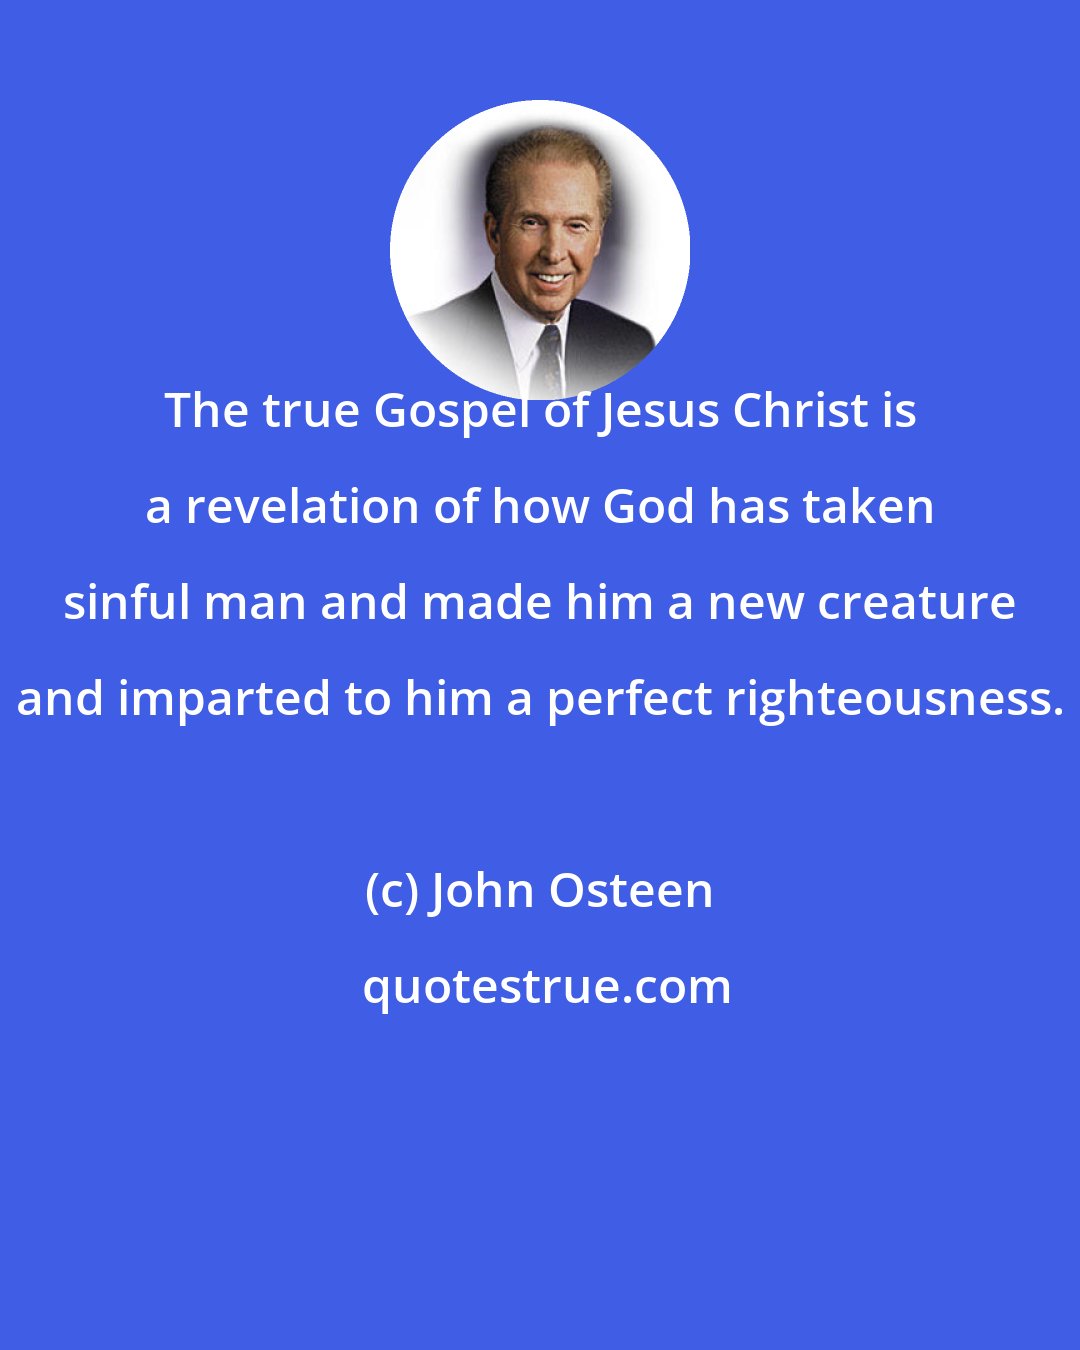 John Osteen: The true Gospel of Jesus Christ is a revelation of how God has taken sinful man and made him a new creature and imparted to him a perfect righteousness.